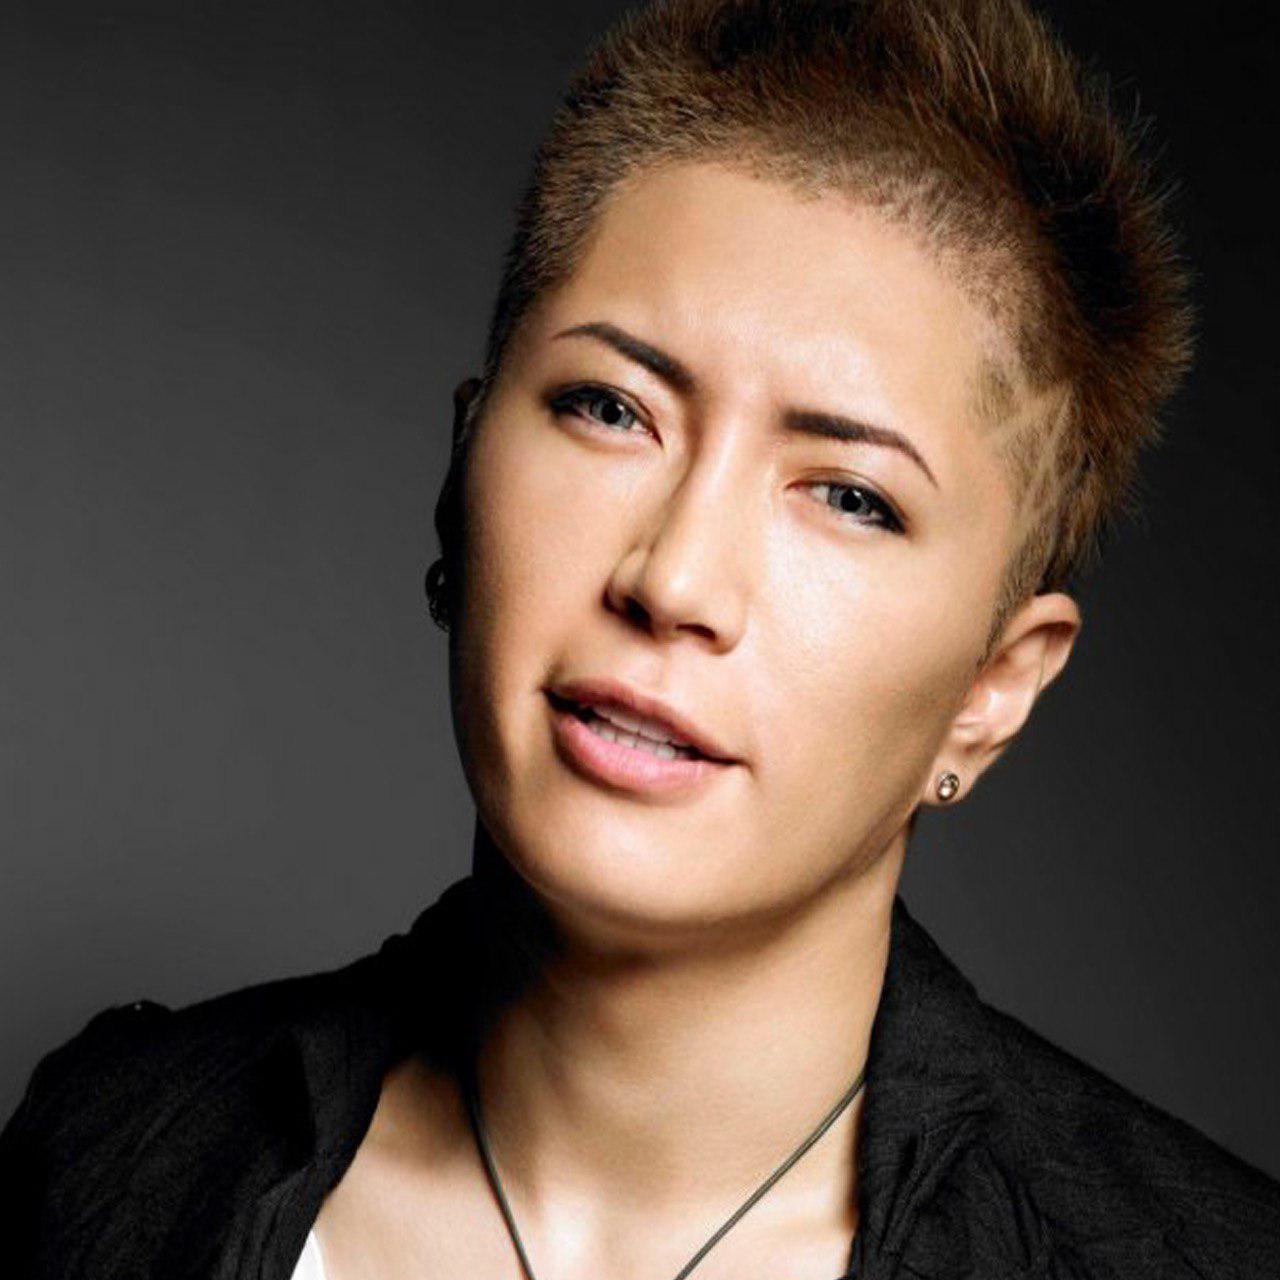 J Pop Star Gackt Caught Between Crypto Company Spindle And Minister S Gaffe Bitcoin News